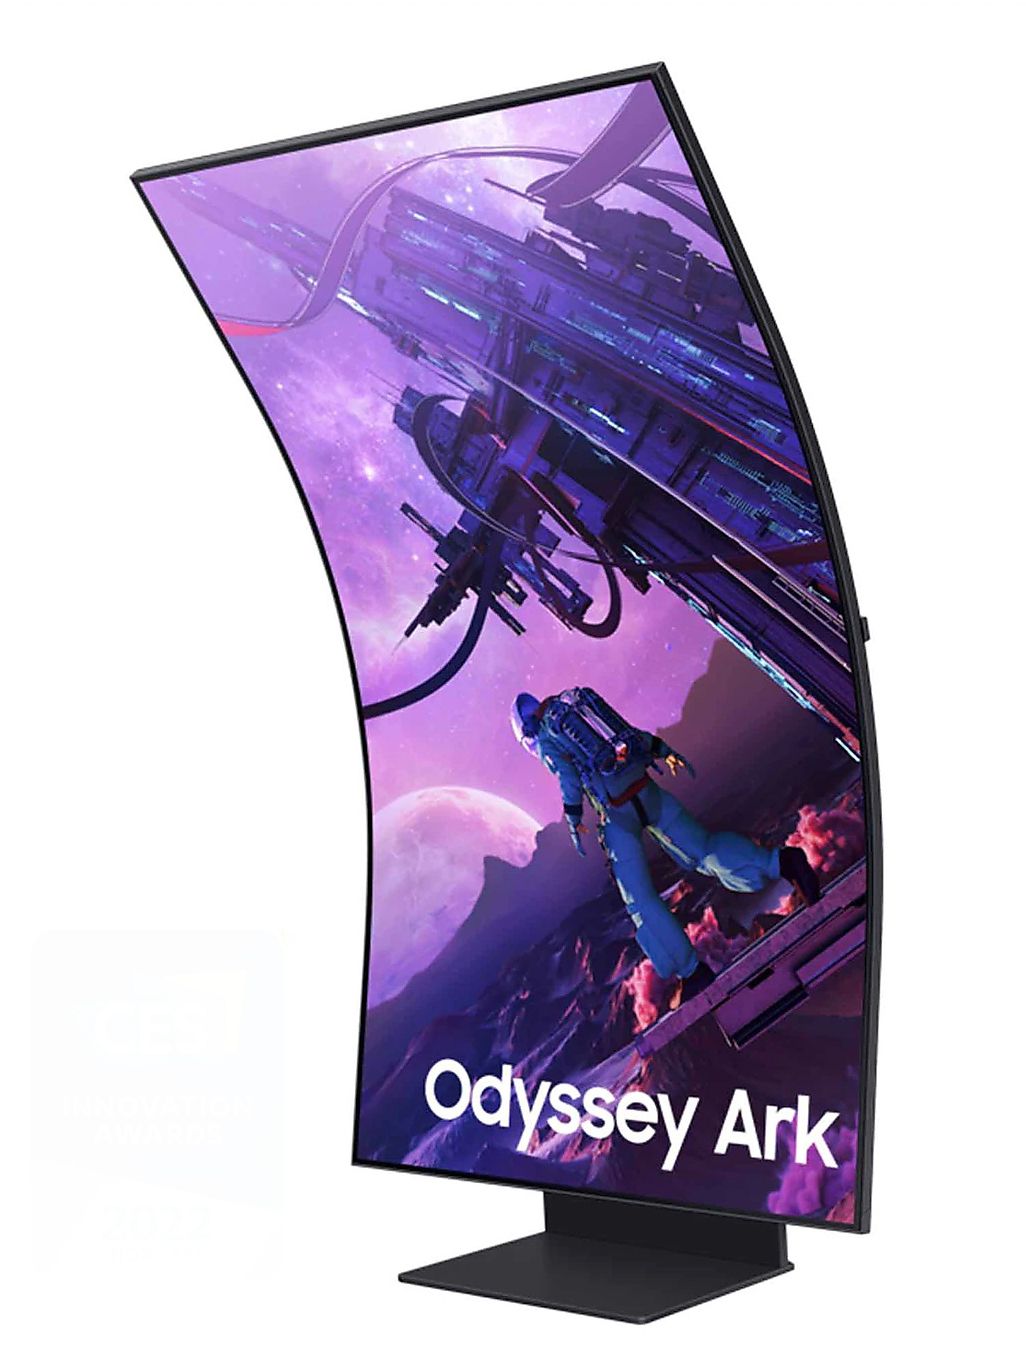 The Odyssey Ark gaming monitor created by Samsung.